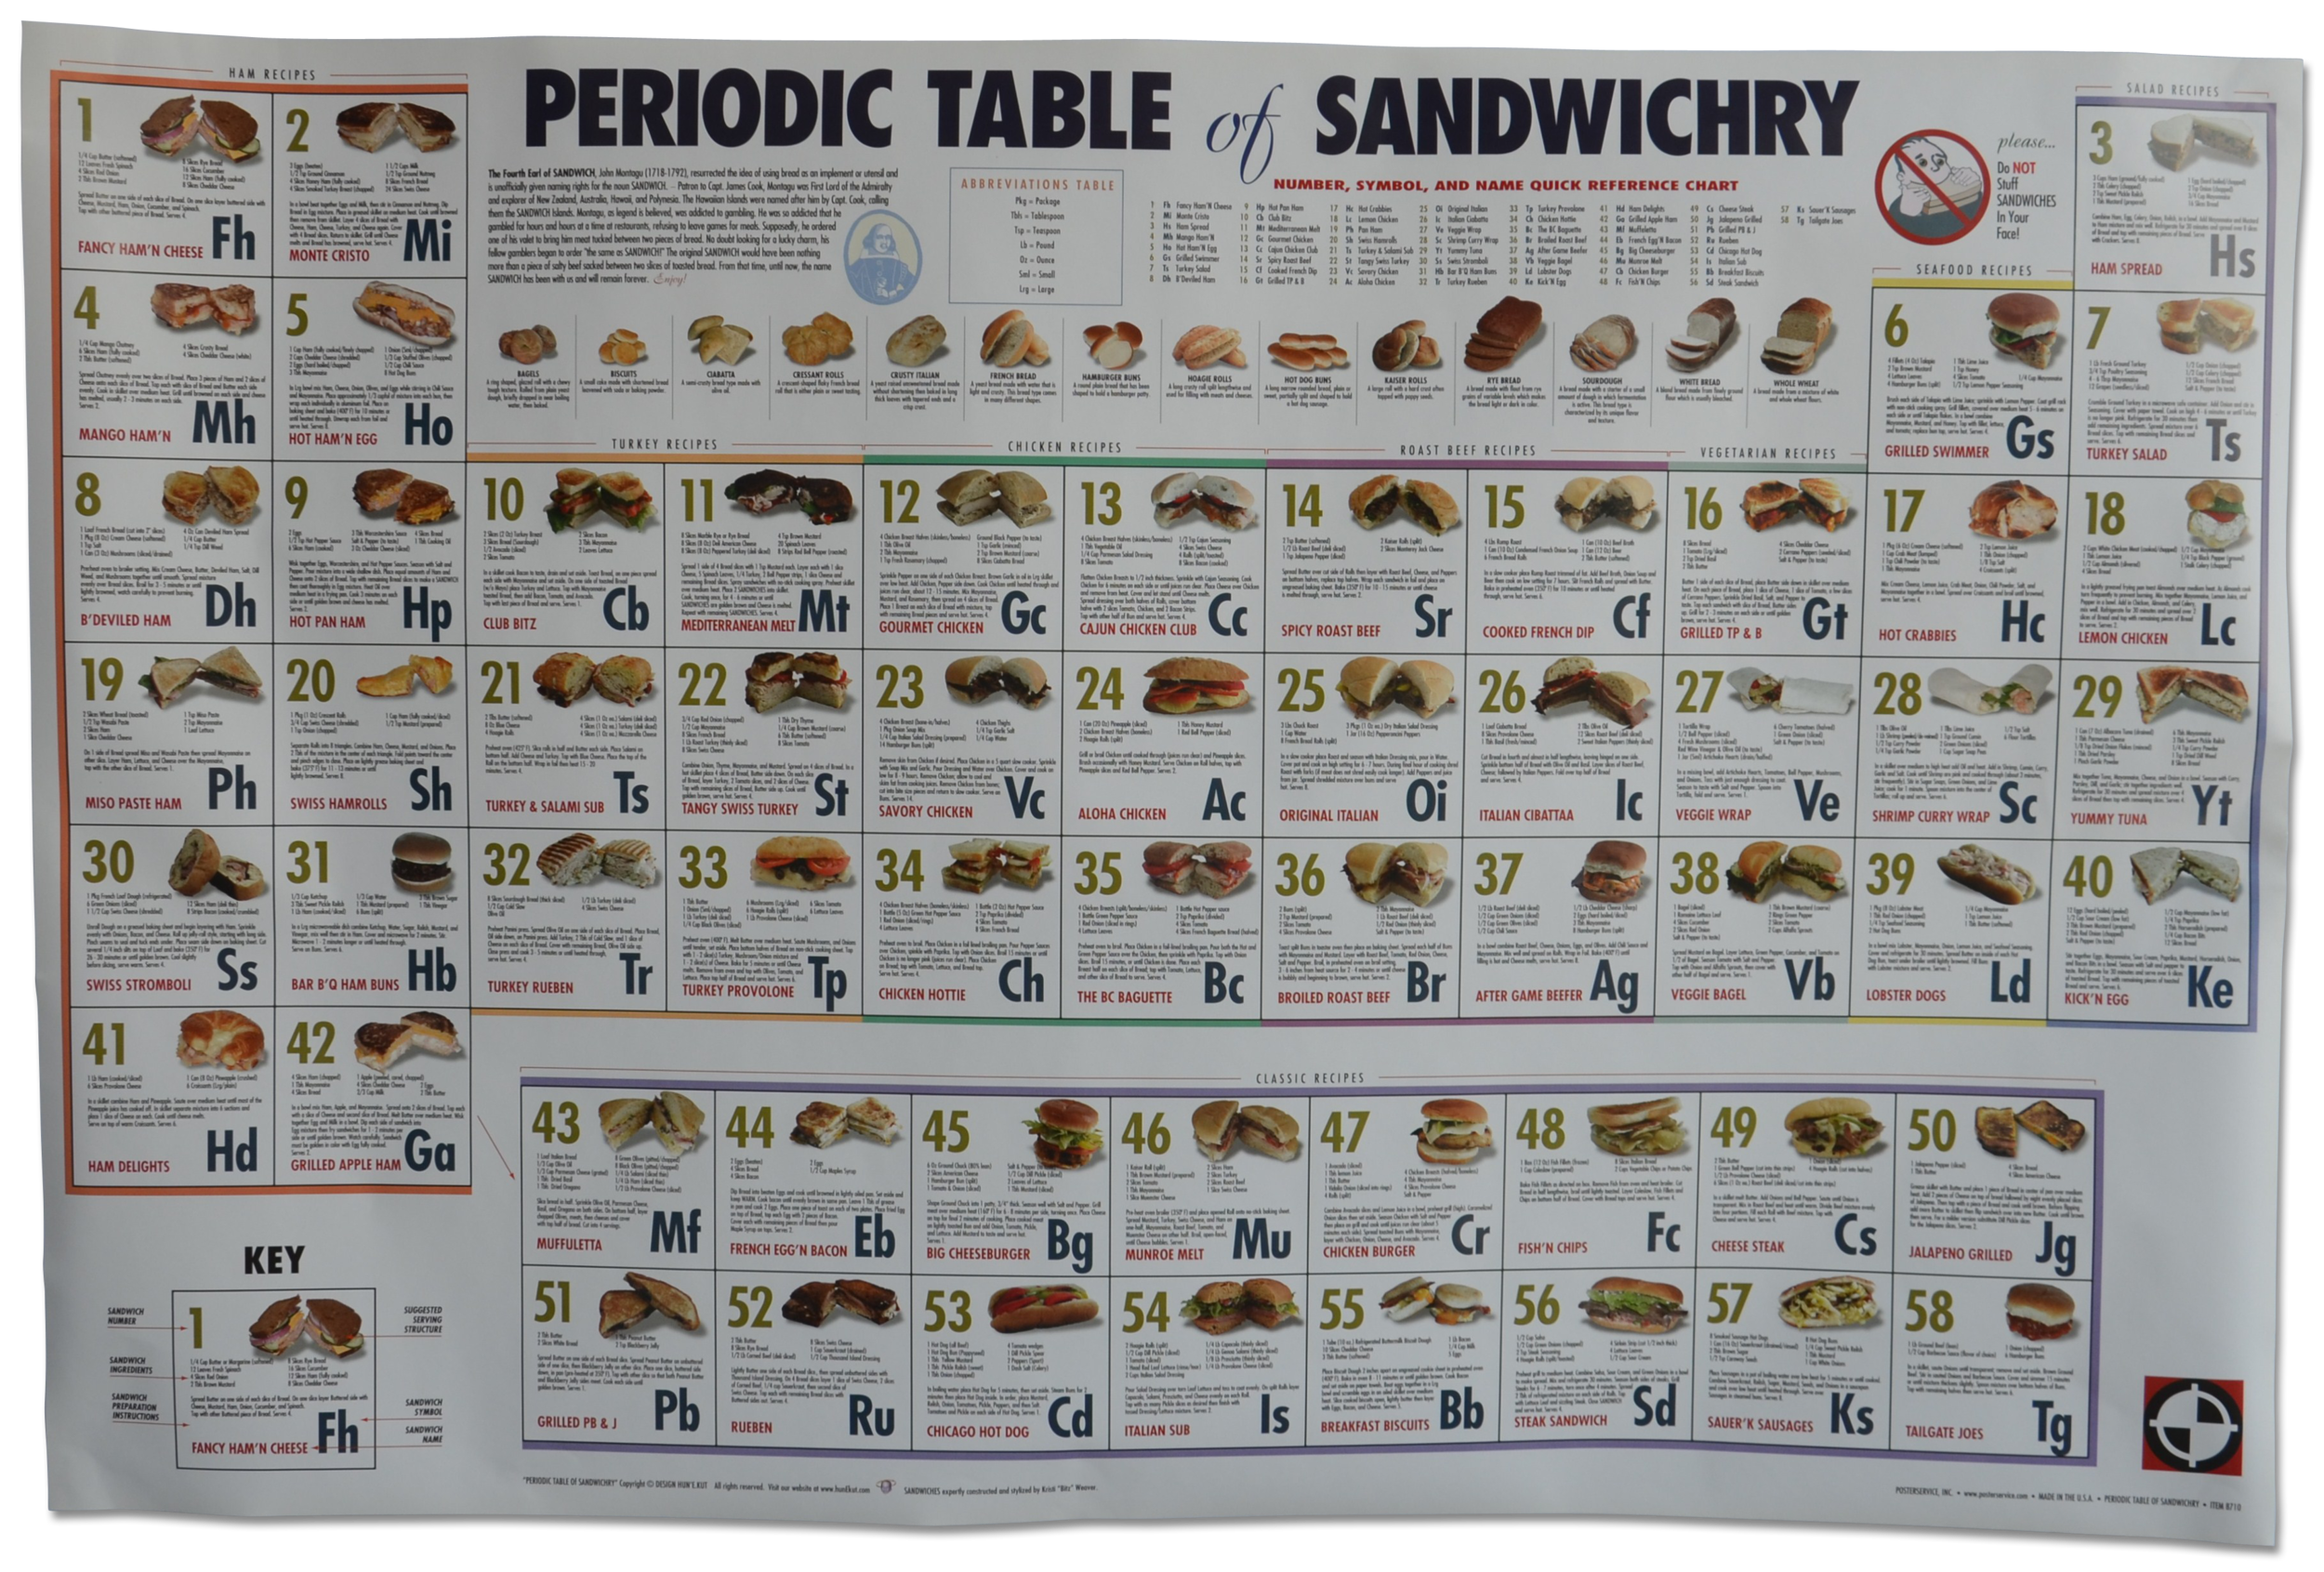 PERIODIC TABLE OF SANDWICHRY